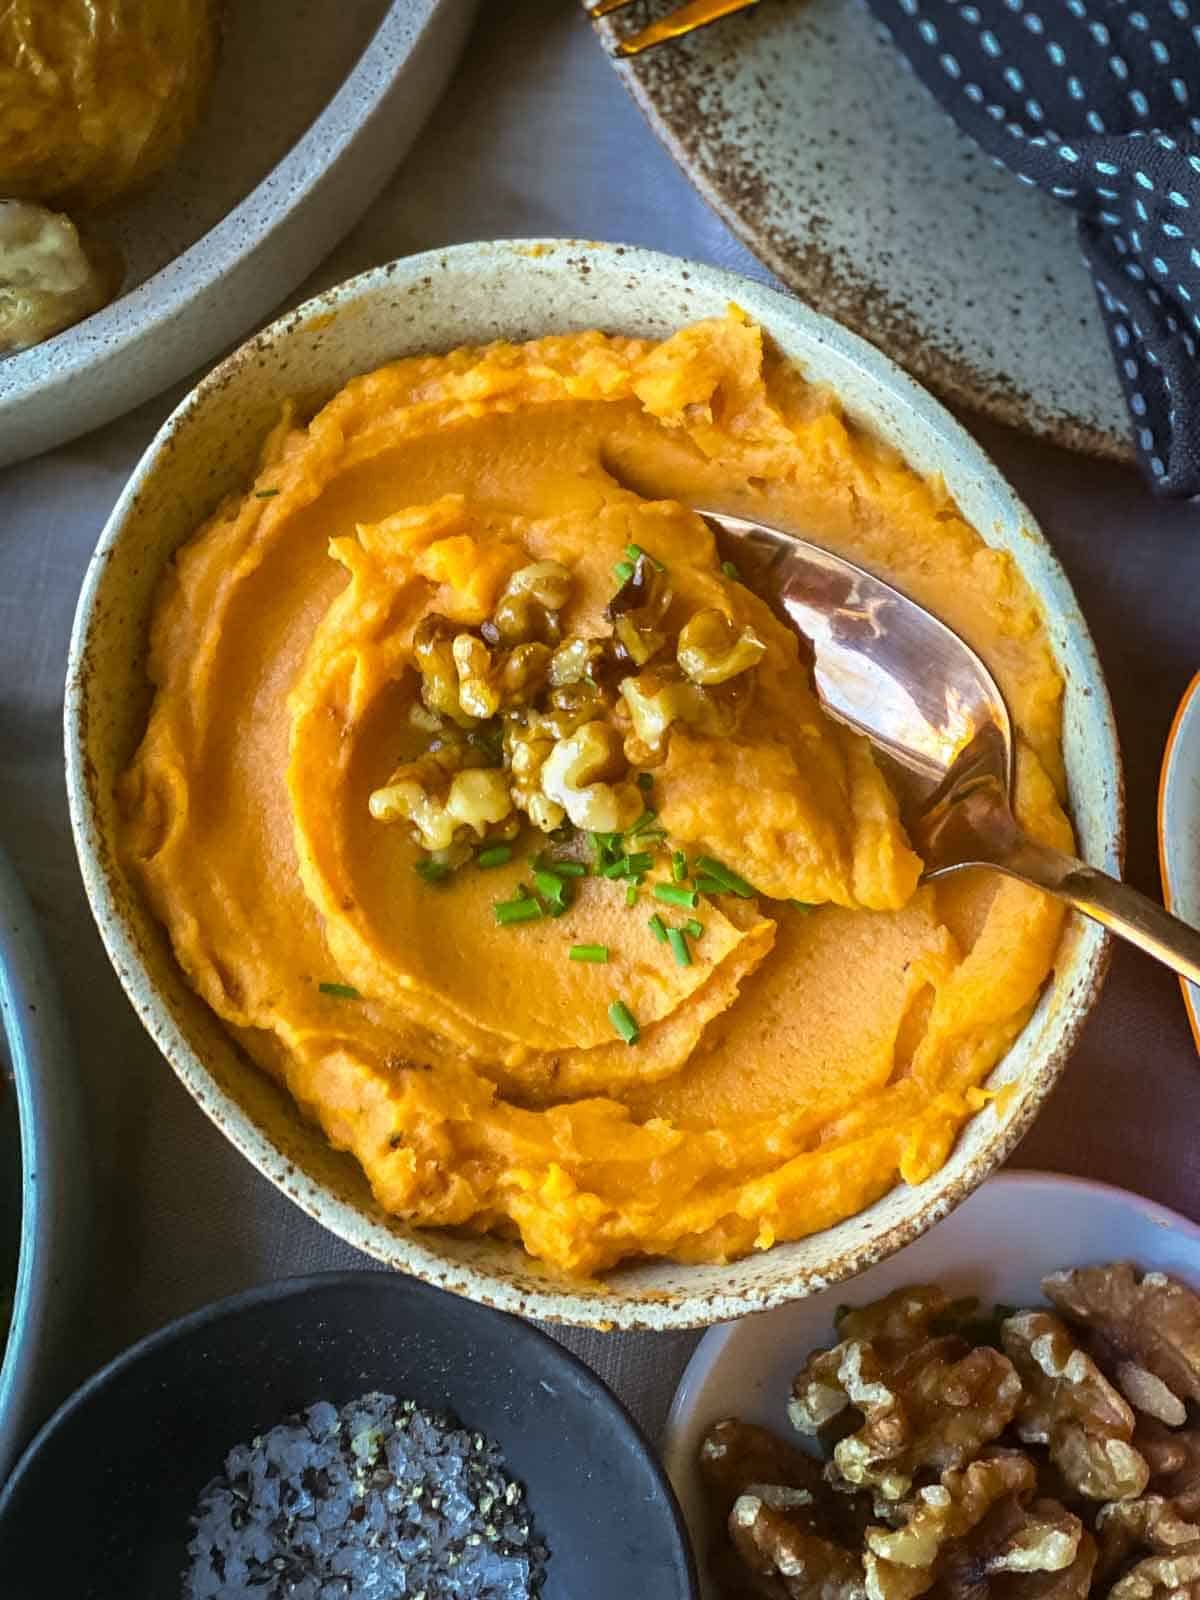 A spoon in a bow of whipped sweet potato next to a bowl of walnuts